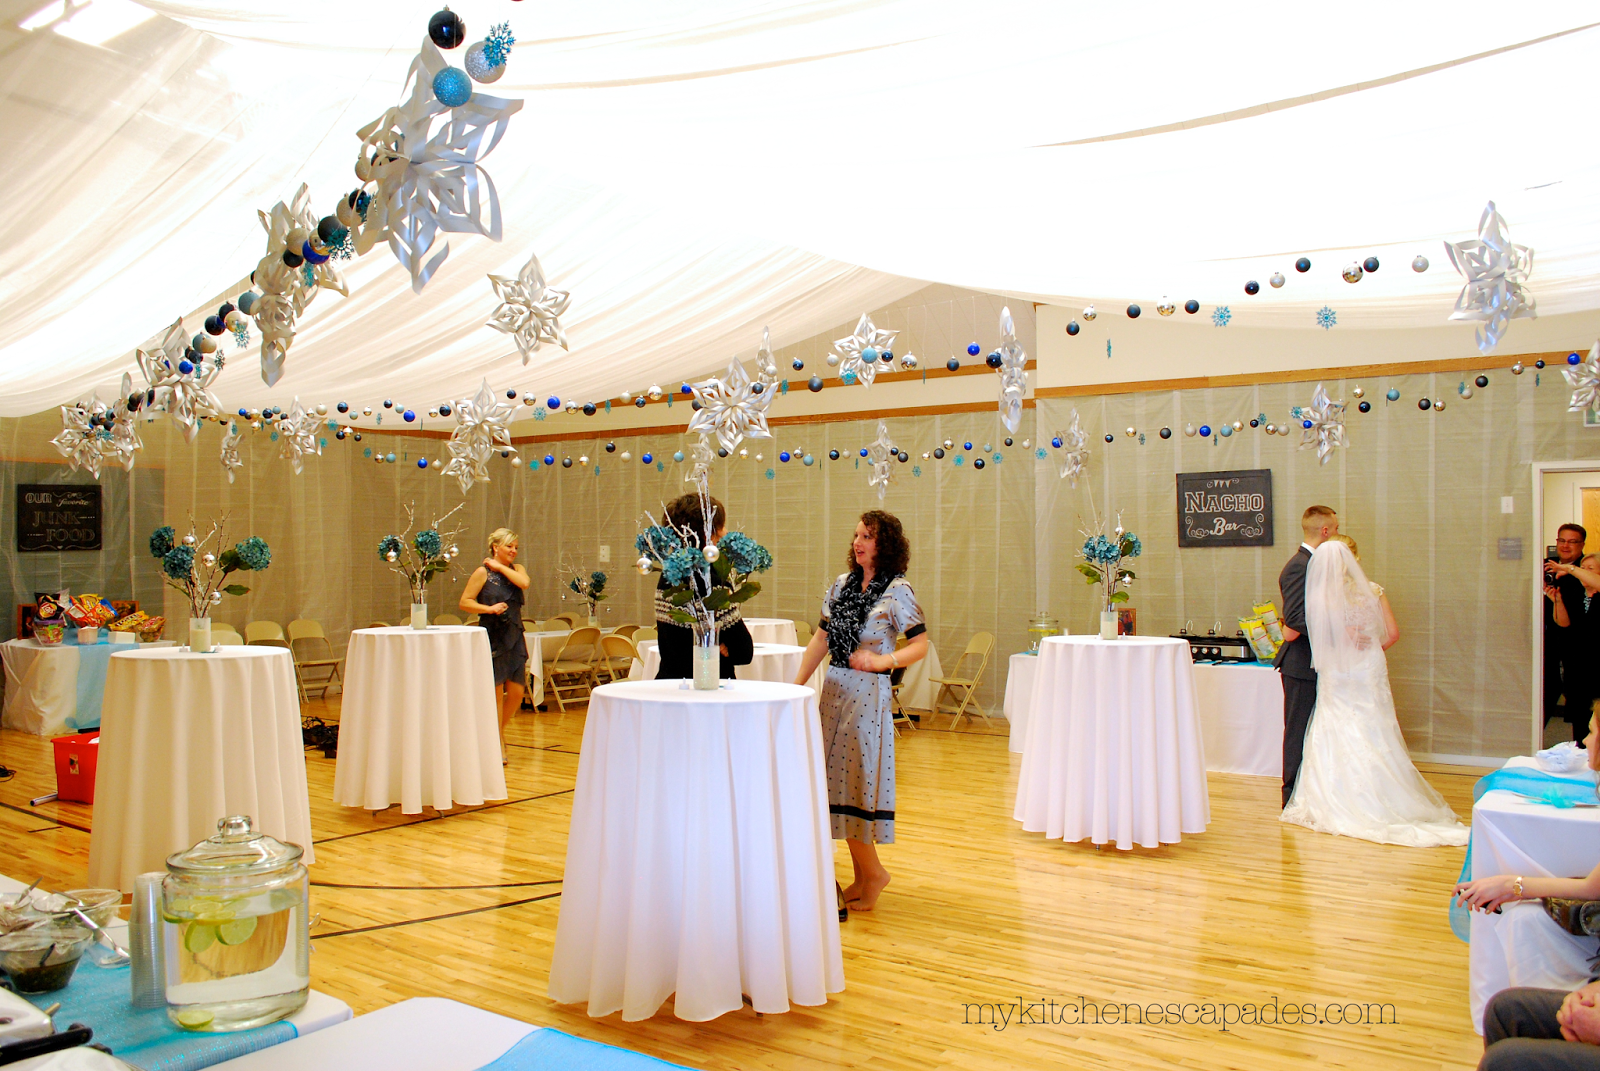 Wedding Ceiling Draping Tutorial - How to Measure and Hang a Fabric Celing